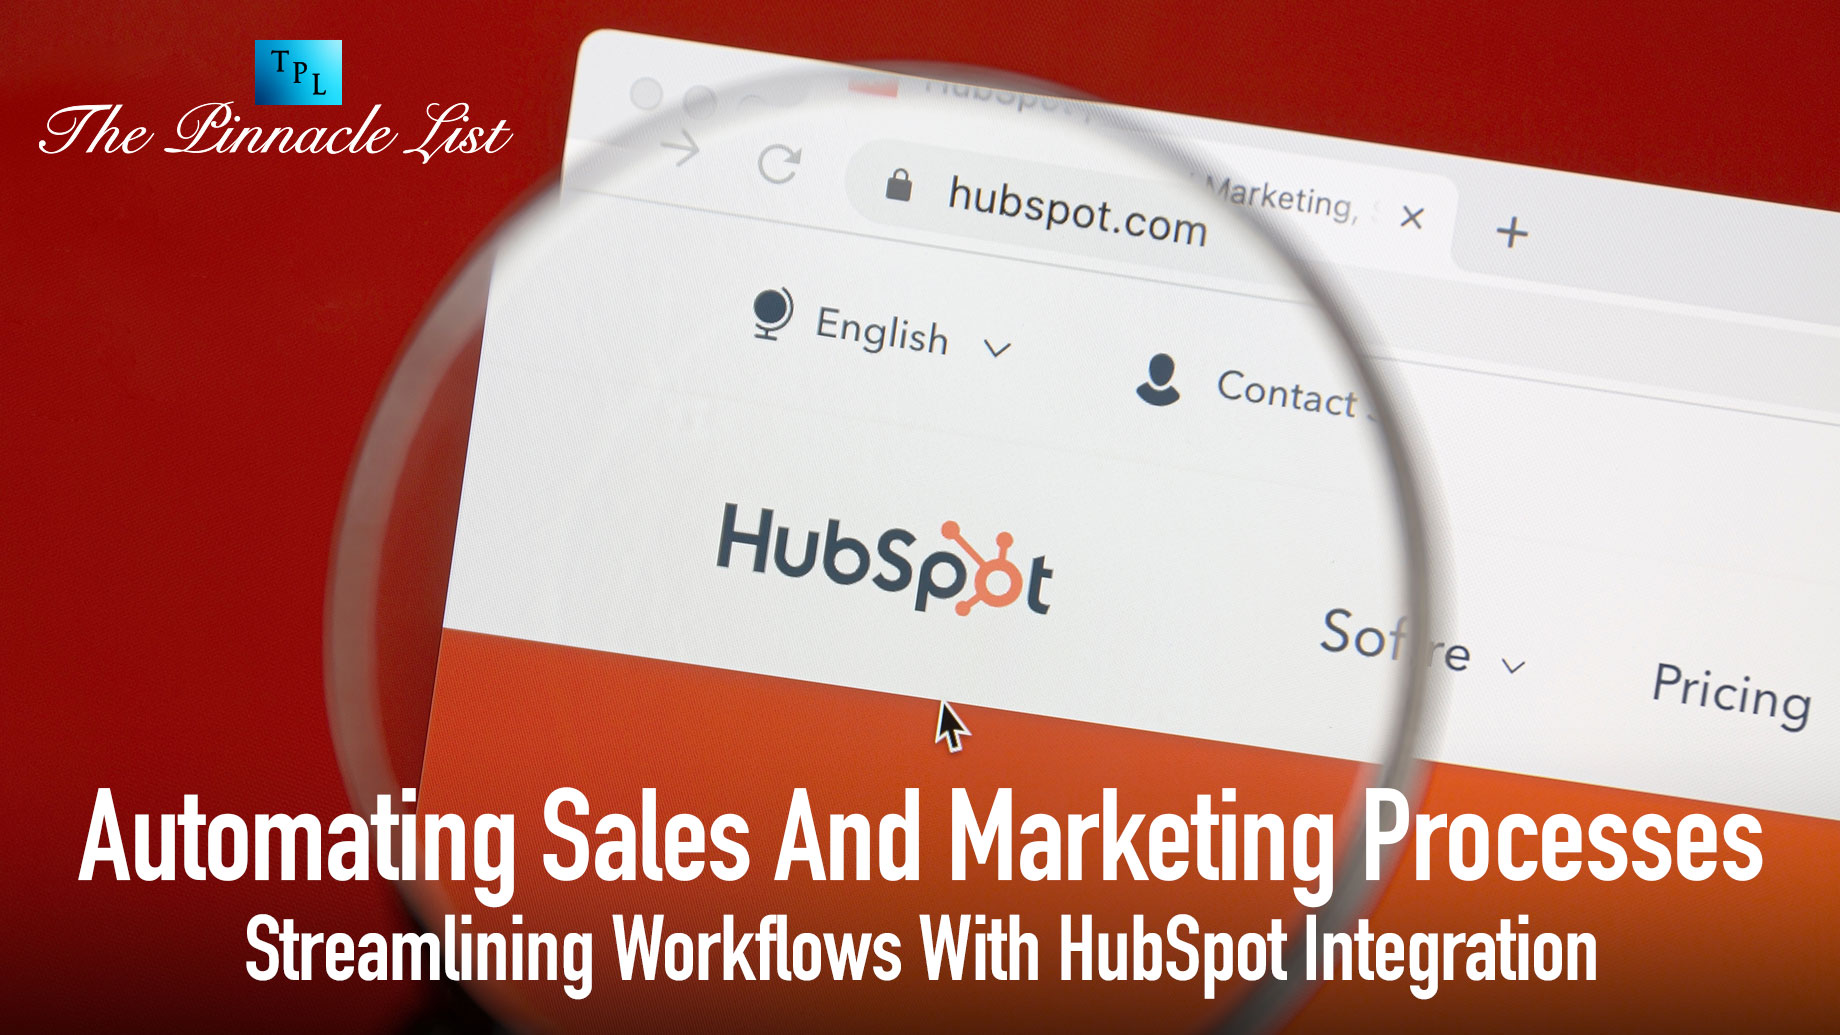 Automating Sales And Marketing Processes: Streamlining Workflows With HubSpot Integration